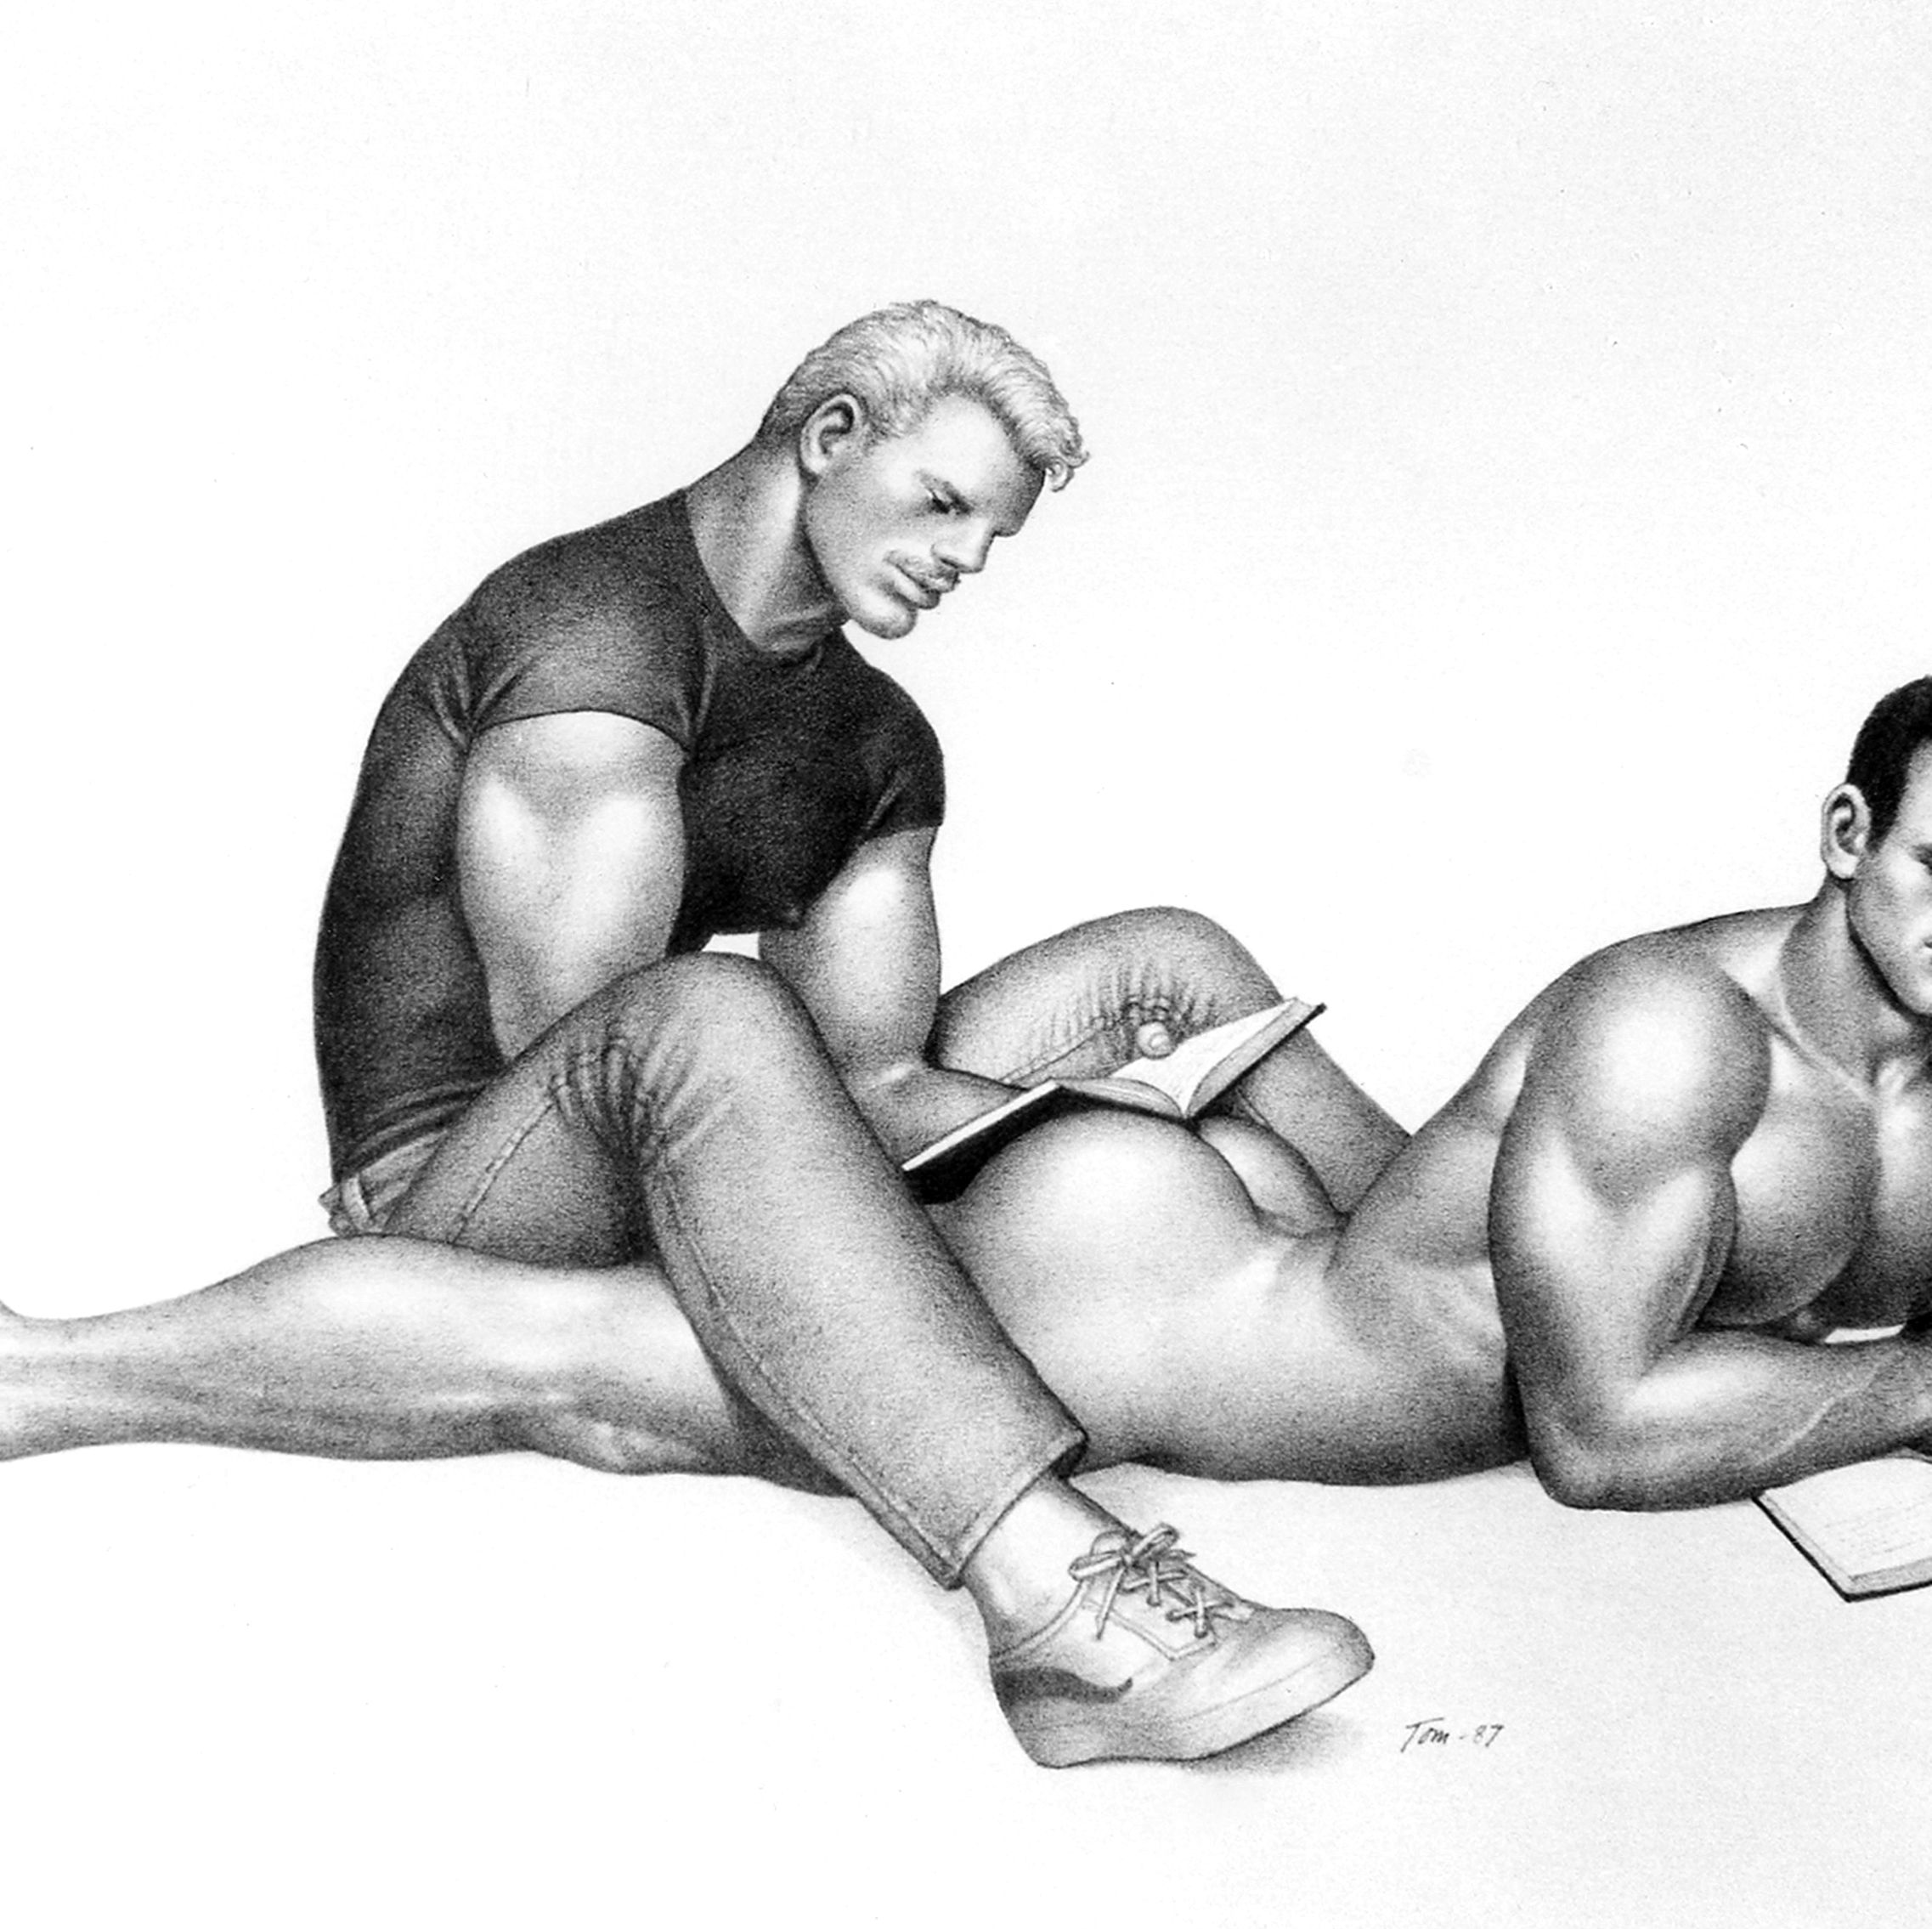 There's A Gay Tom Of Finland Porno Stashed In Your Wardrobe